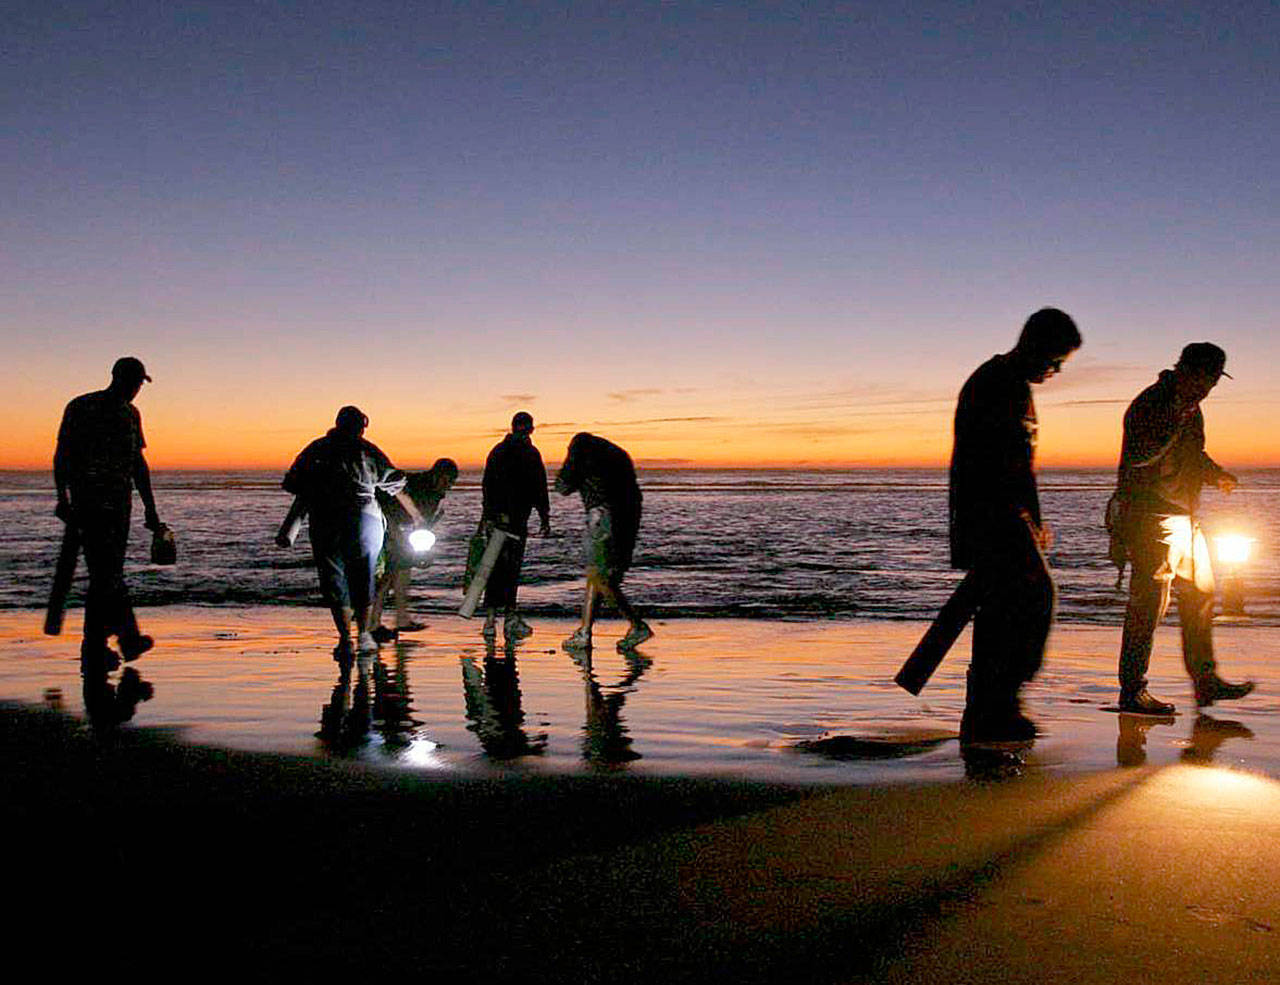 Razor clam season is in dire straights as spiking levels of domoic acid in the razor clam population along Pacific Ocean beaches could mean an early end to the entire season for Twin Harbors. (Dan Ayres/Washington Department of Fish and Wildlife)